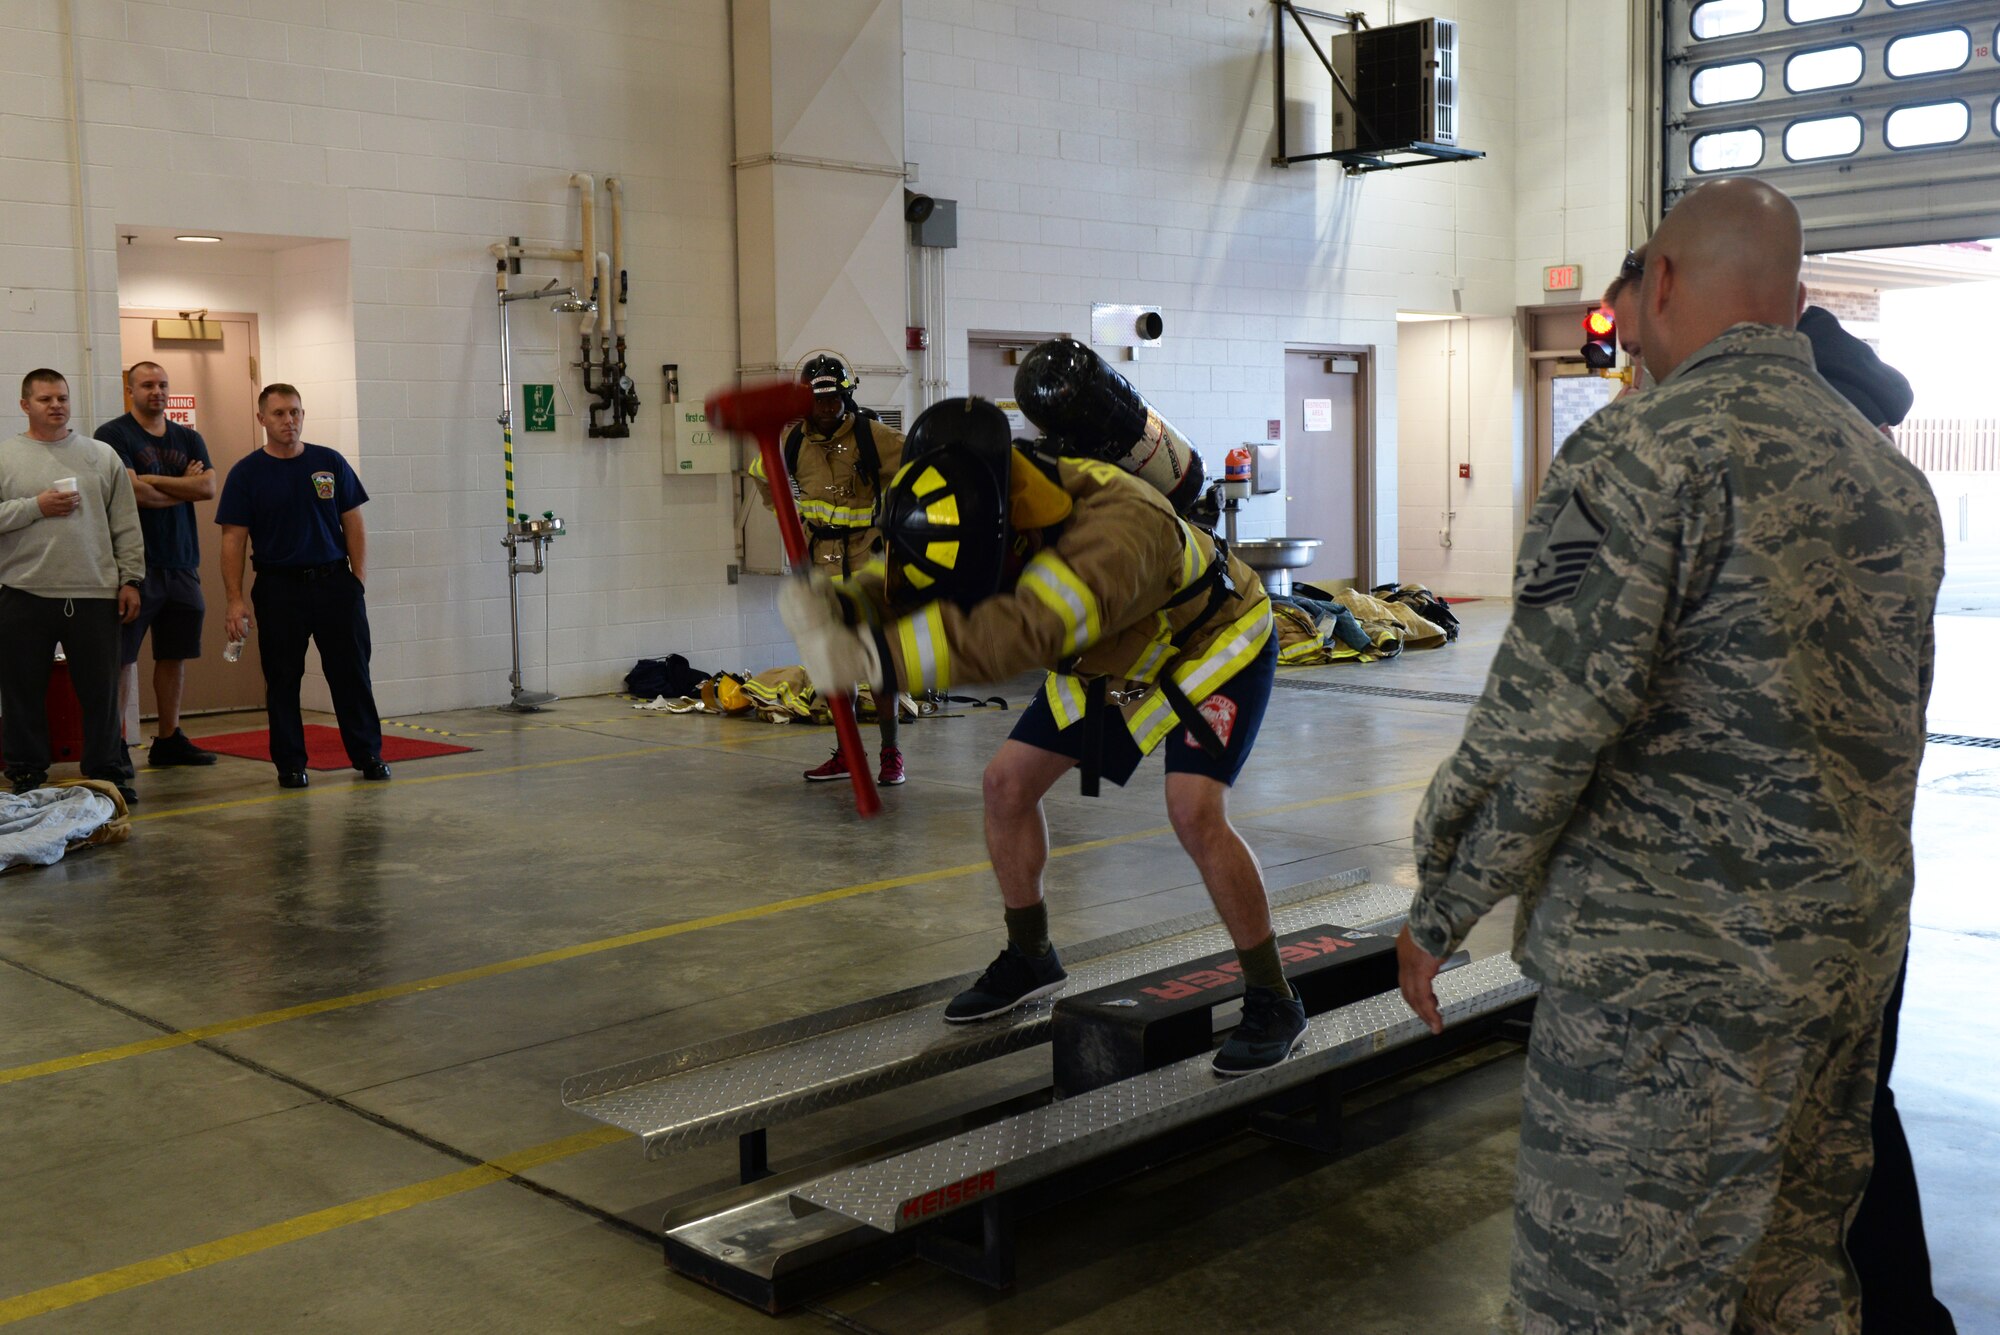 An Airman hits a keiser sled during the Firefighter Challenge at the 28th Civil Engineer Squadron Fire Department at Ellsworth Air Force Base, S.D., Oct. 4, 2019. Hitting a keiser sled simulates trying to bust down drywall or a hard wall during a house fire. (U.S. Air Force photo by Airman Quentin K. Marx)